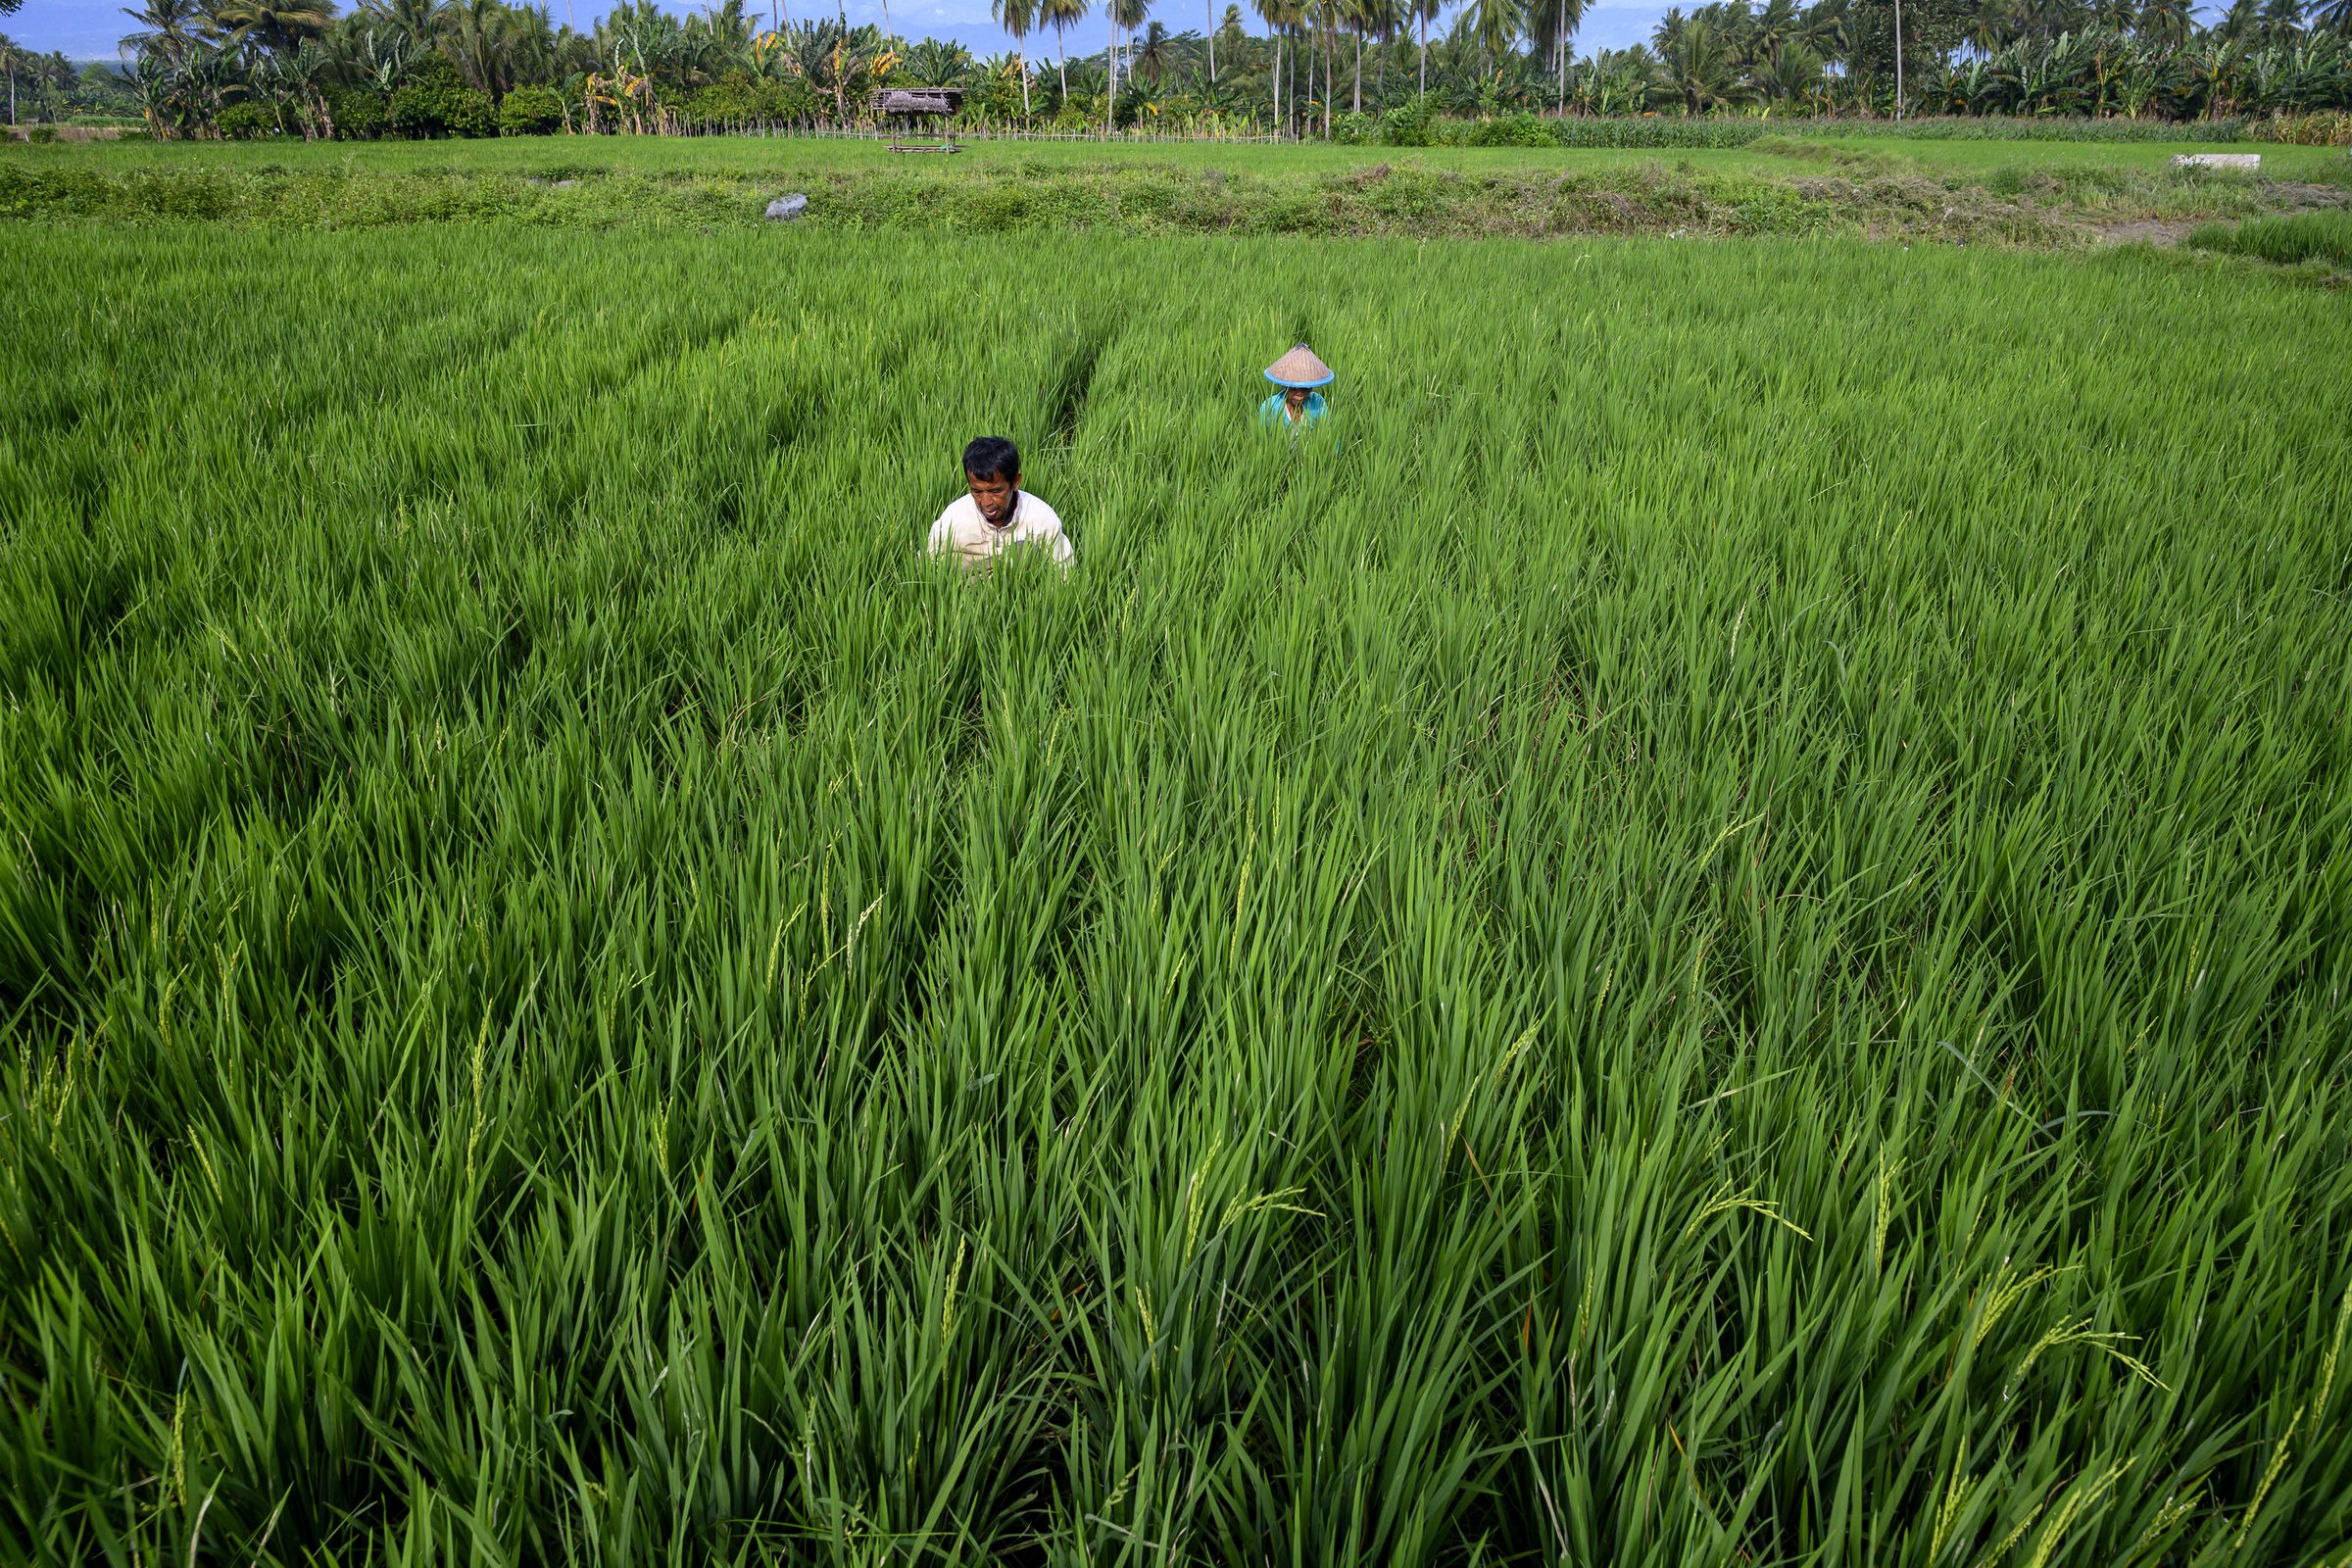 Farmers weed their rice fields in Central Sulawesi, Indonesia